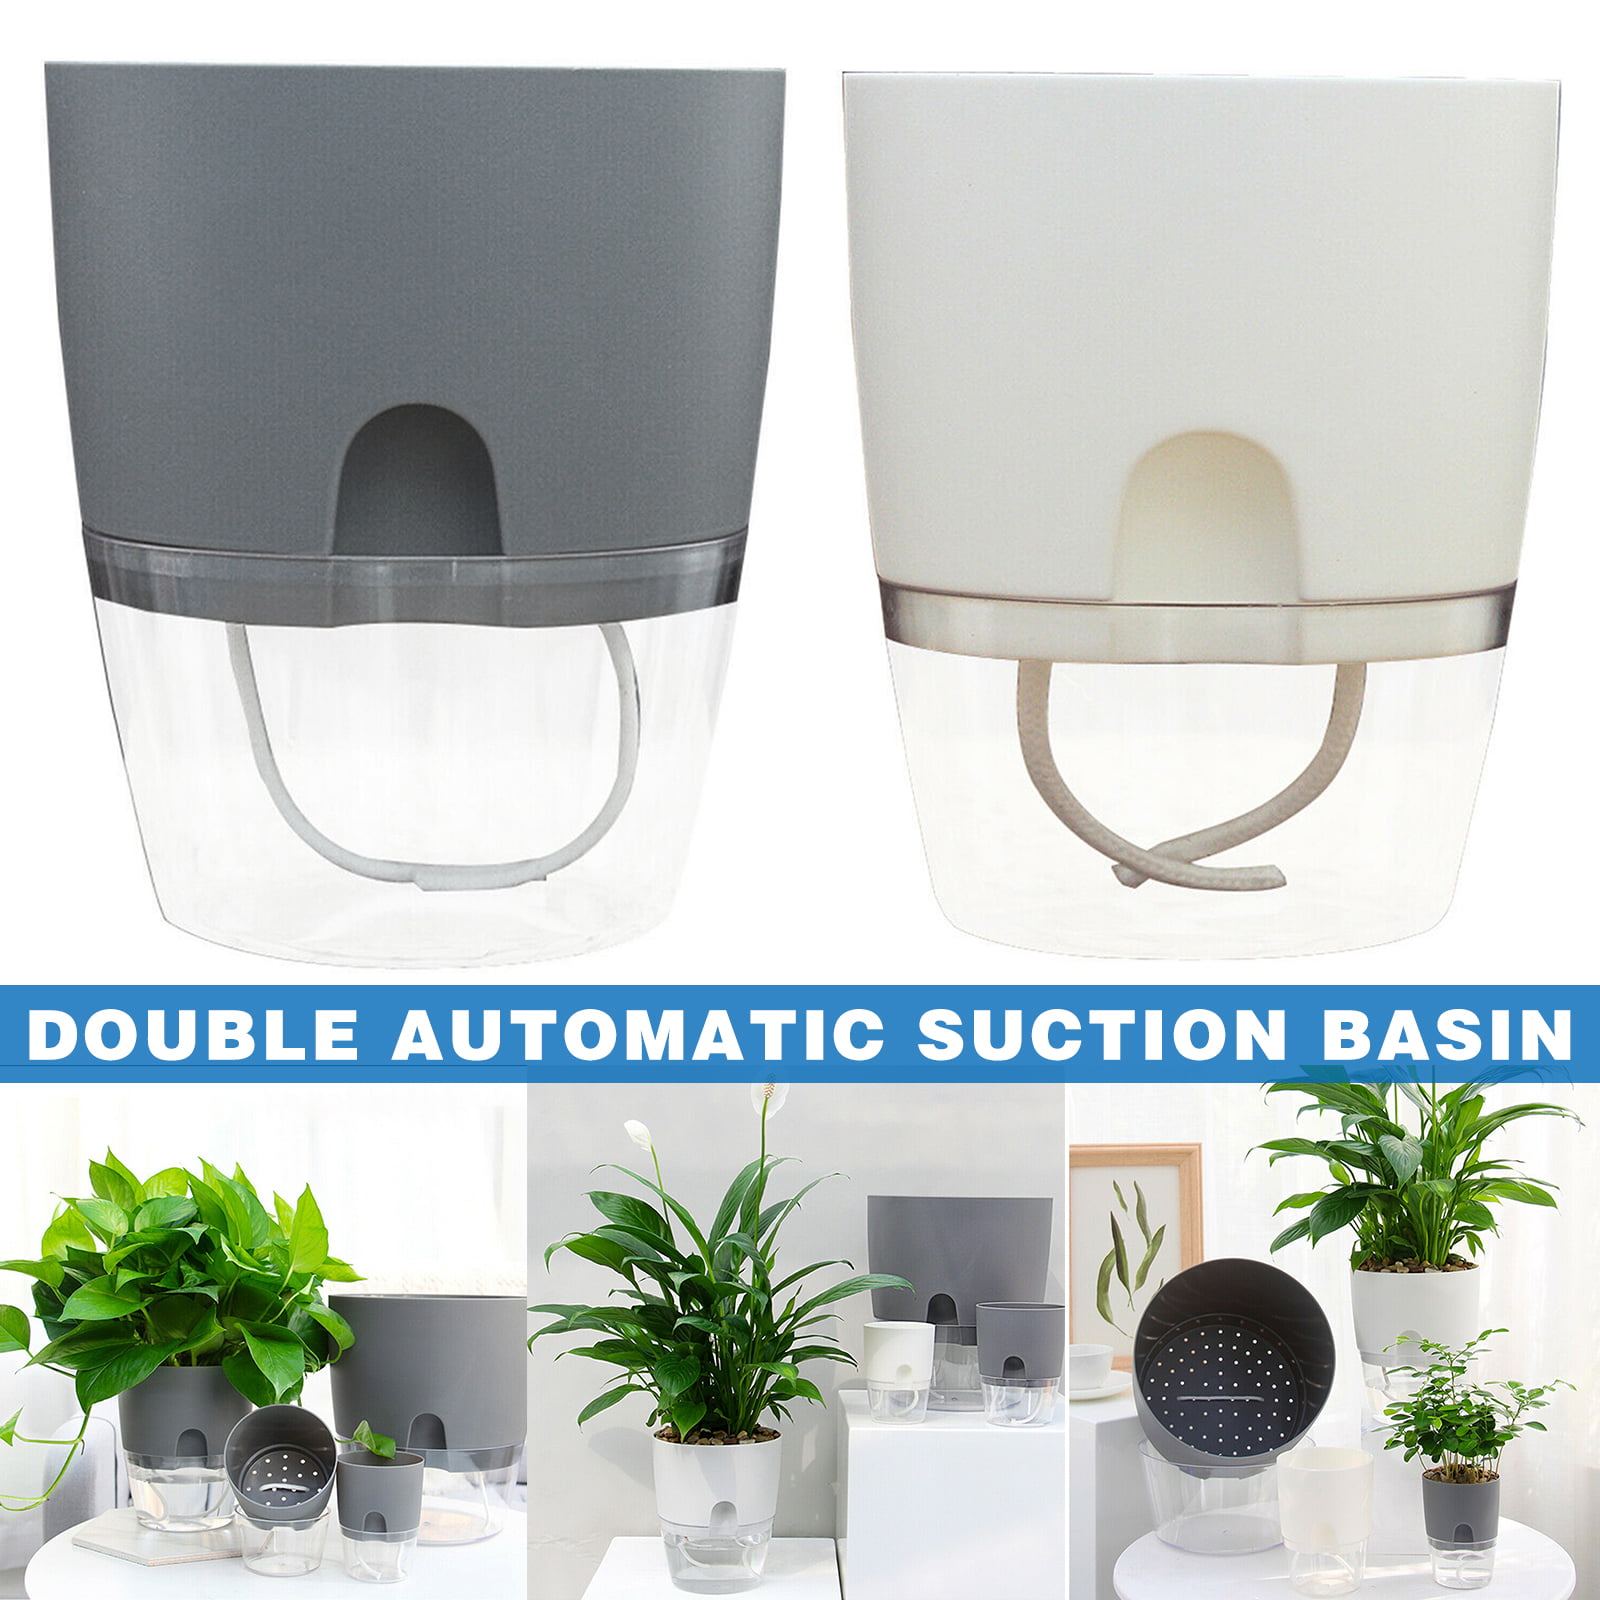 Self-Watering Water Planter Vase Plastic Double Layer Planter Pot for Home Office Decor 